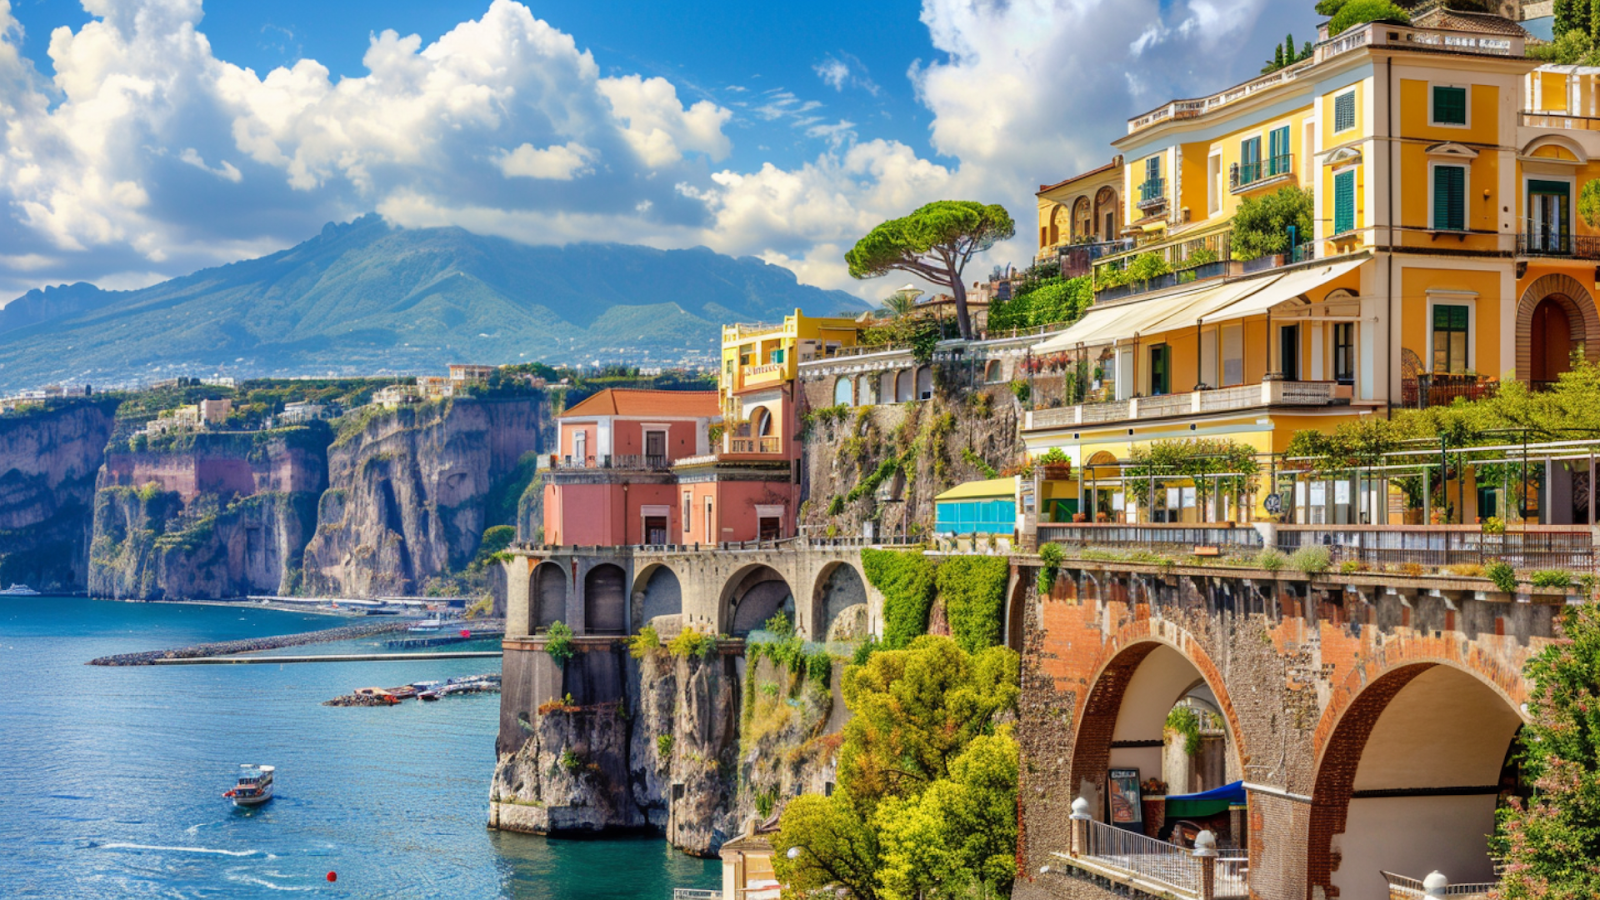 The colorful coastal houses in Sorrento, Italy